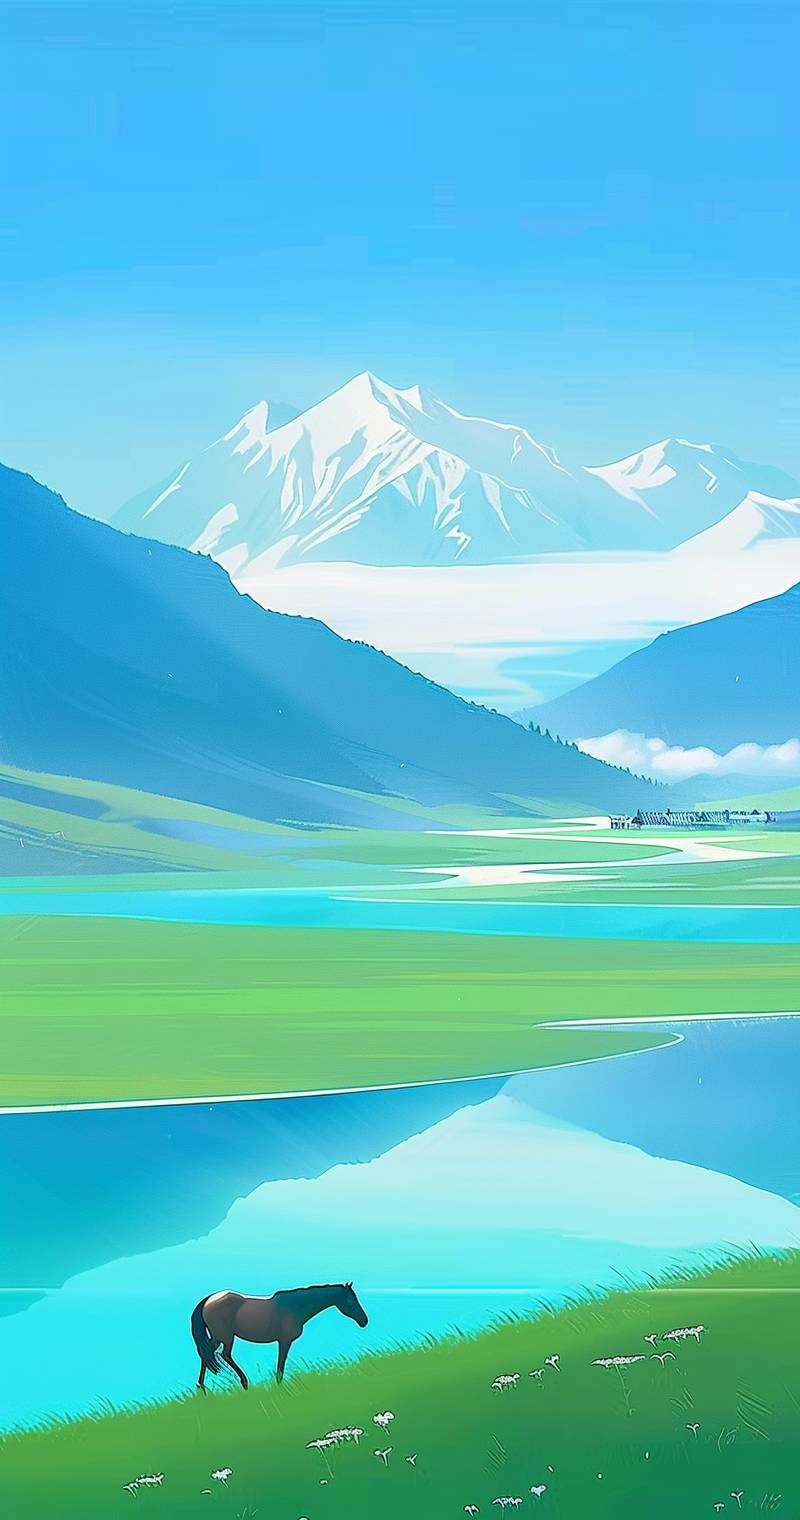 In the spring, there is green grass on both sides of the river with snowcapped mountains in the distance and a clear blue sky. A horse walks alone by the lake, surrounded by vast meadows and distant villages. The flat illustration style creates an atmosphere full of vitality. It uses bright colors to highlight fresh natural scenery. In closeup shots, you can see that it presents delicate lines and soft lighting effects. This scene seems like a picture drawn from nature itself, in the style of nature itself.